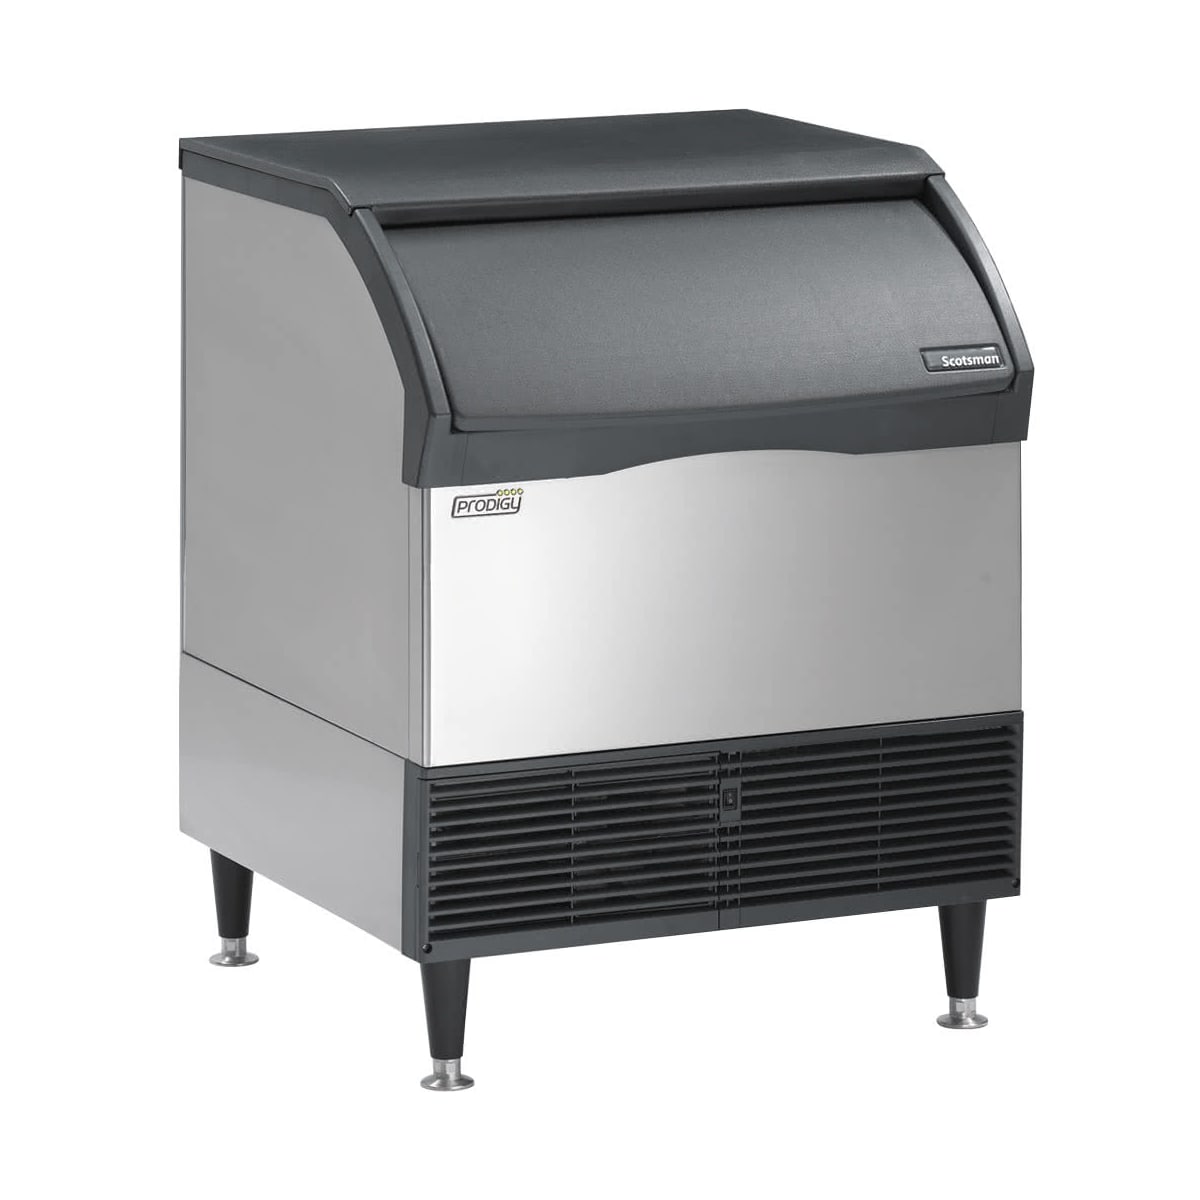 Residential and Commercial Ice Makers & Refrigeration:: Icemakerdirect